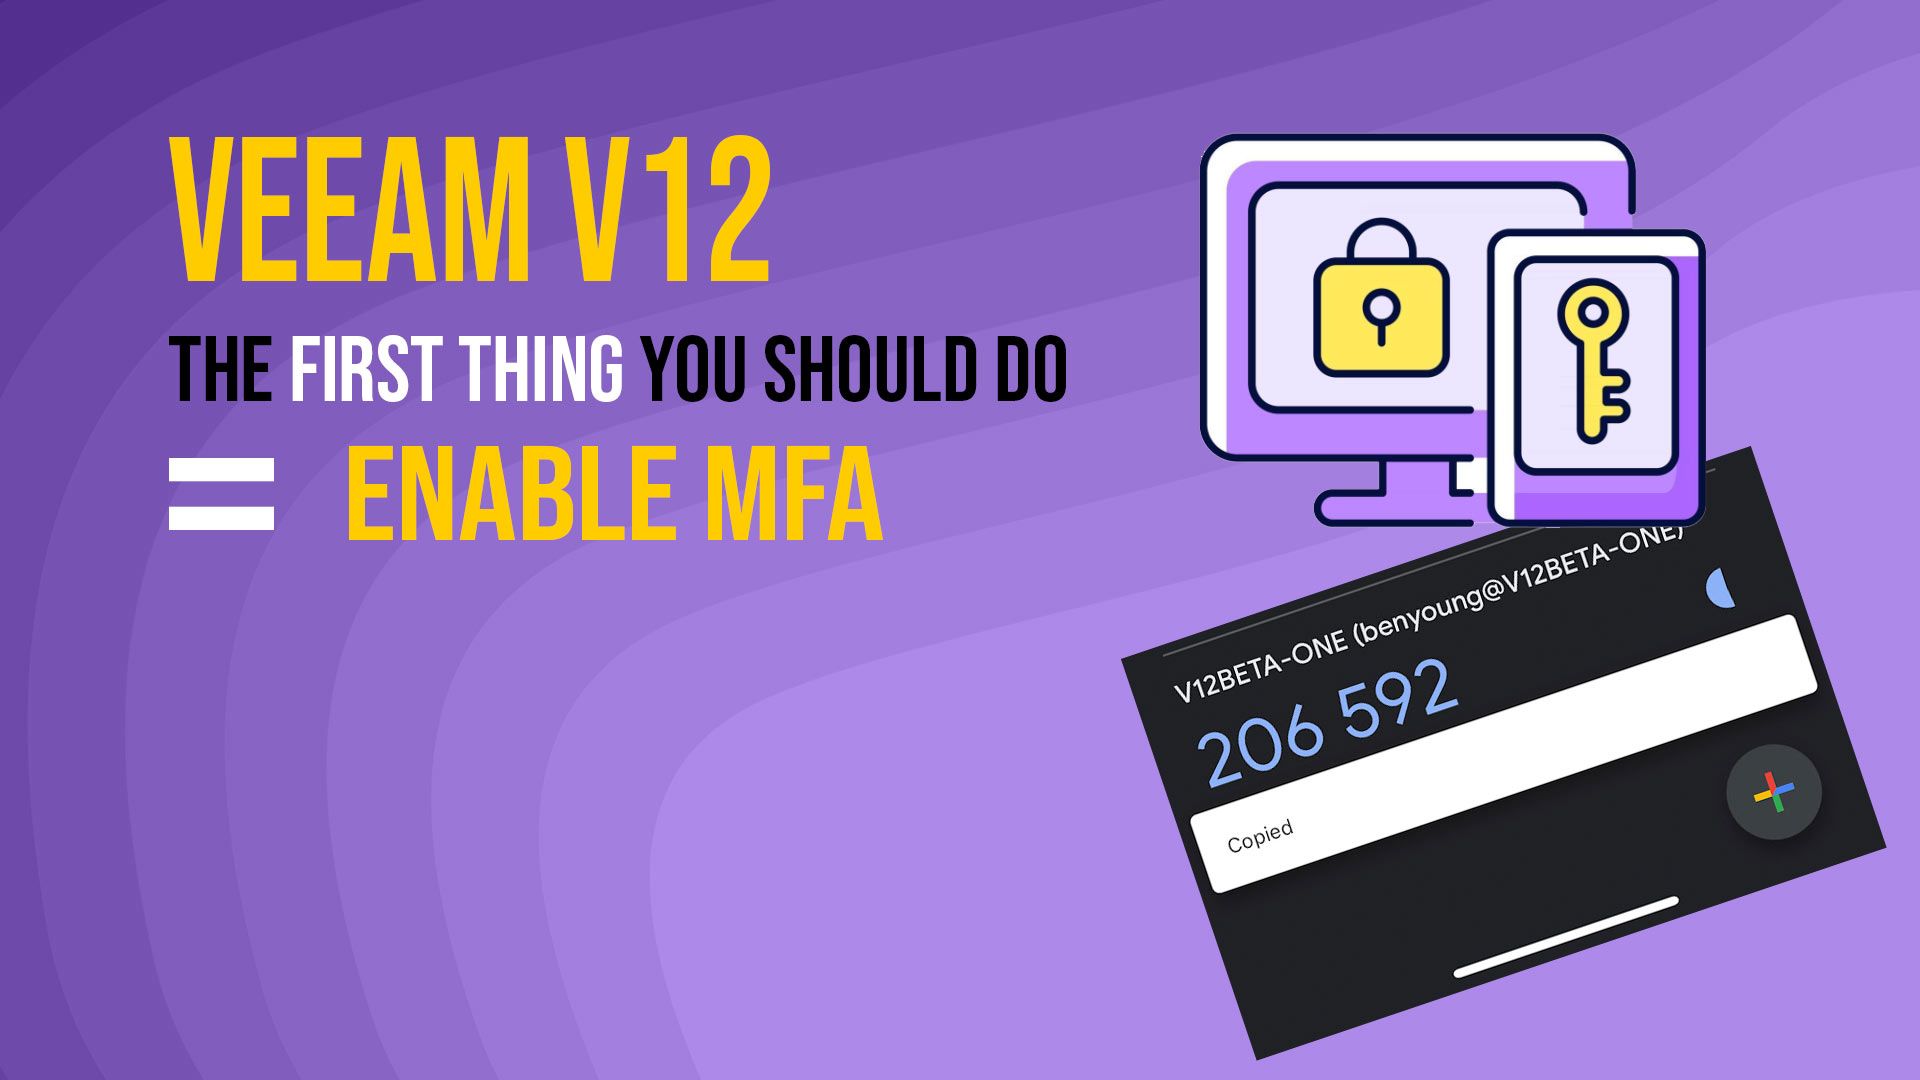 Protect your Veeam console by enabling MFA